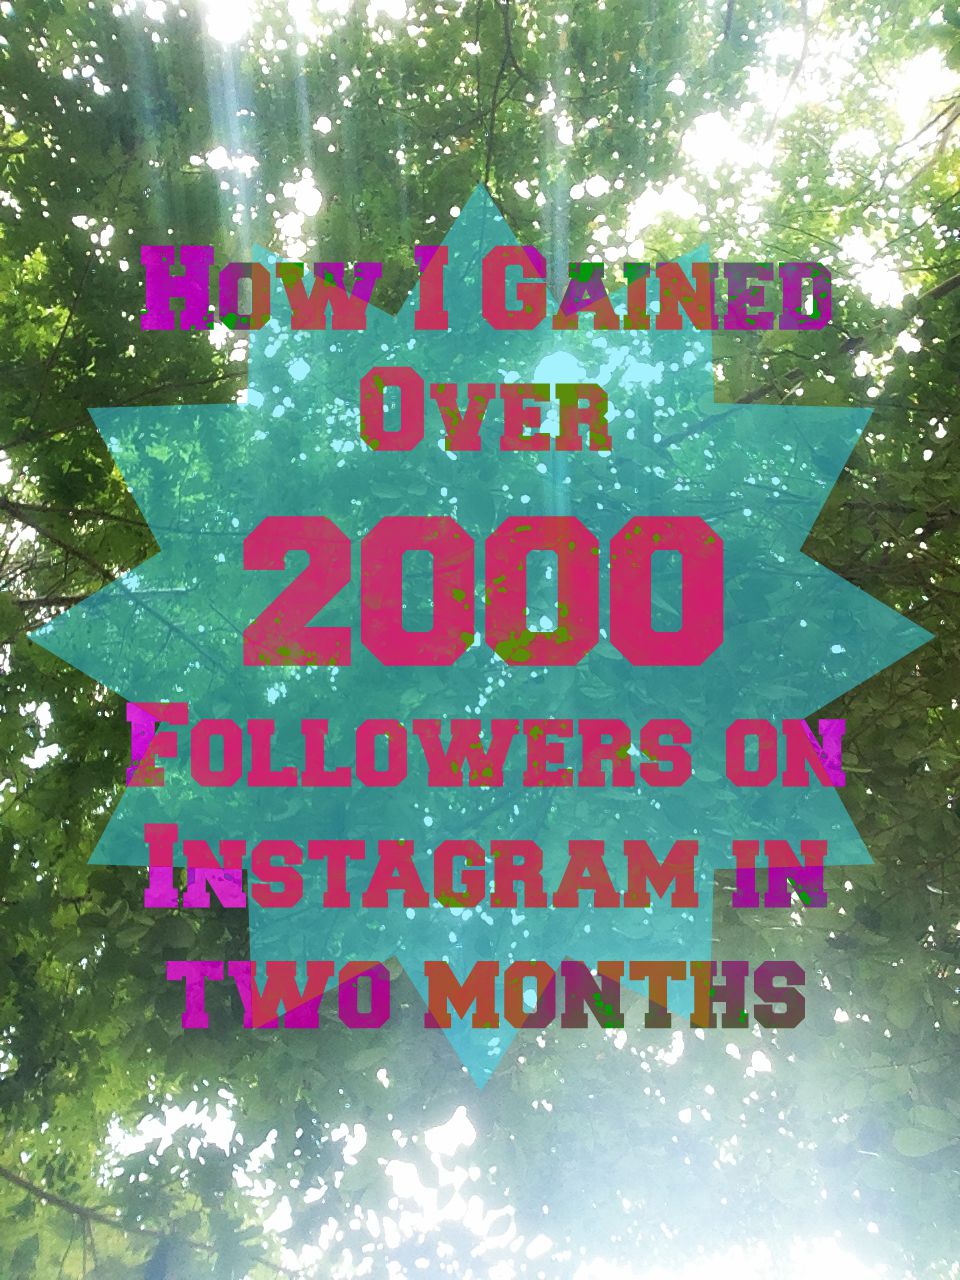 how to gain 2000 followers on instagram - is 2000 followers on instagram a lot